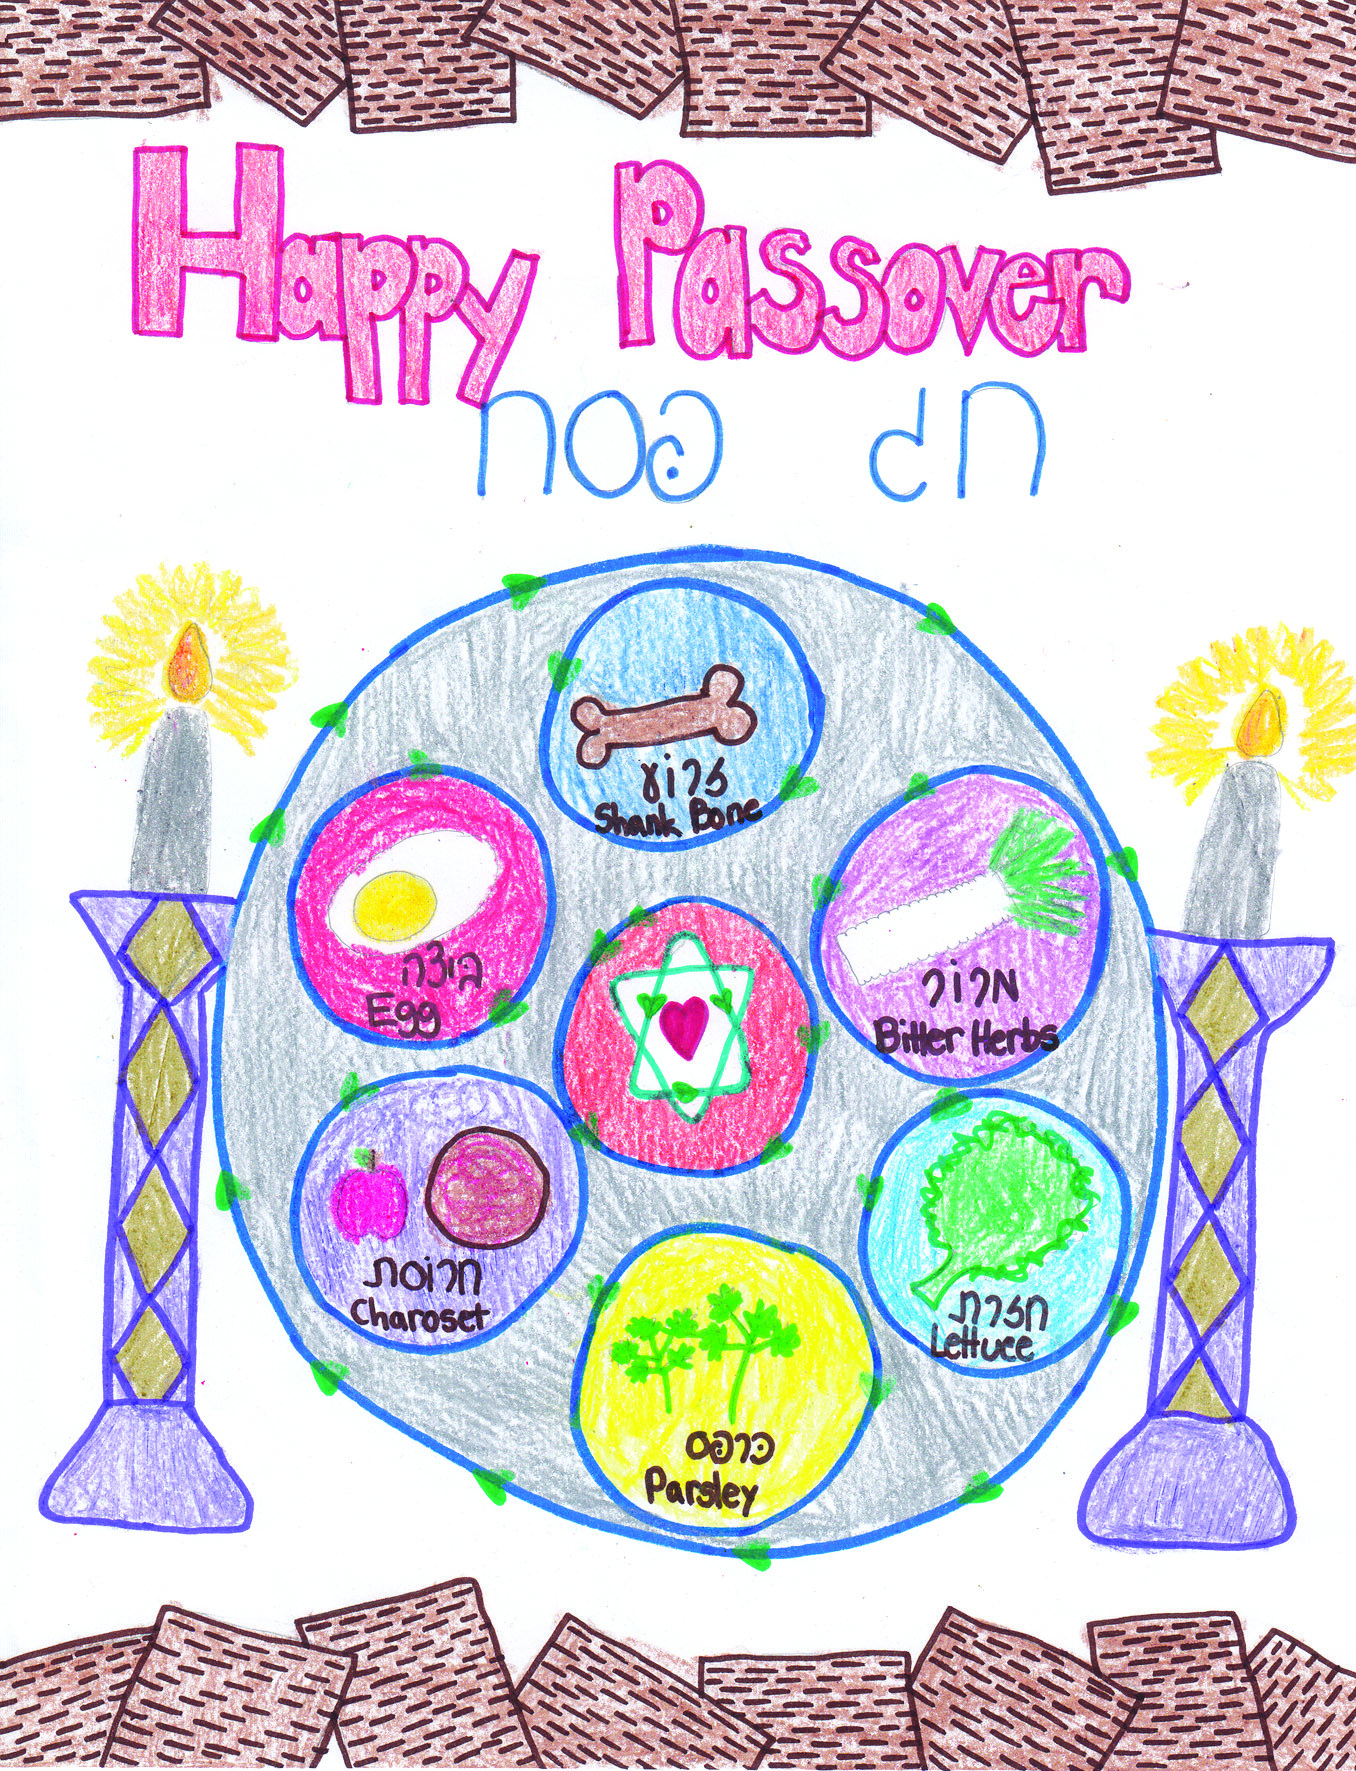 Happy Passover Hand Made Card